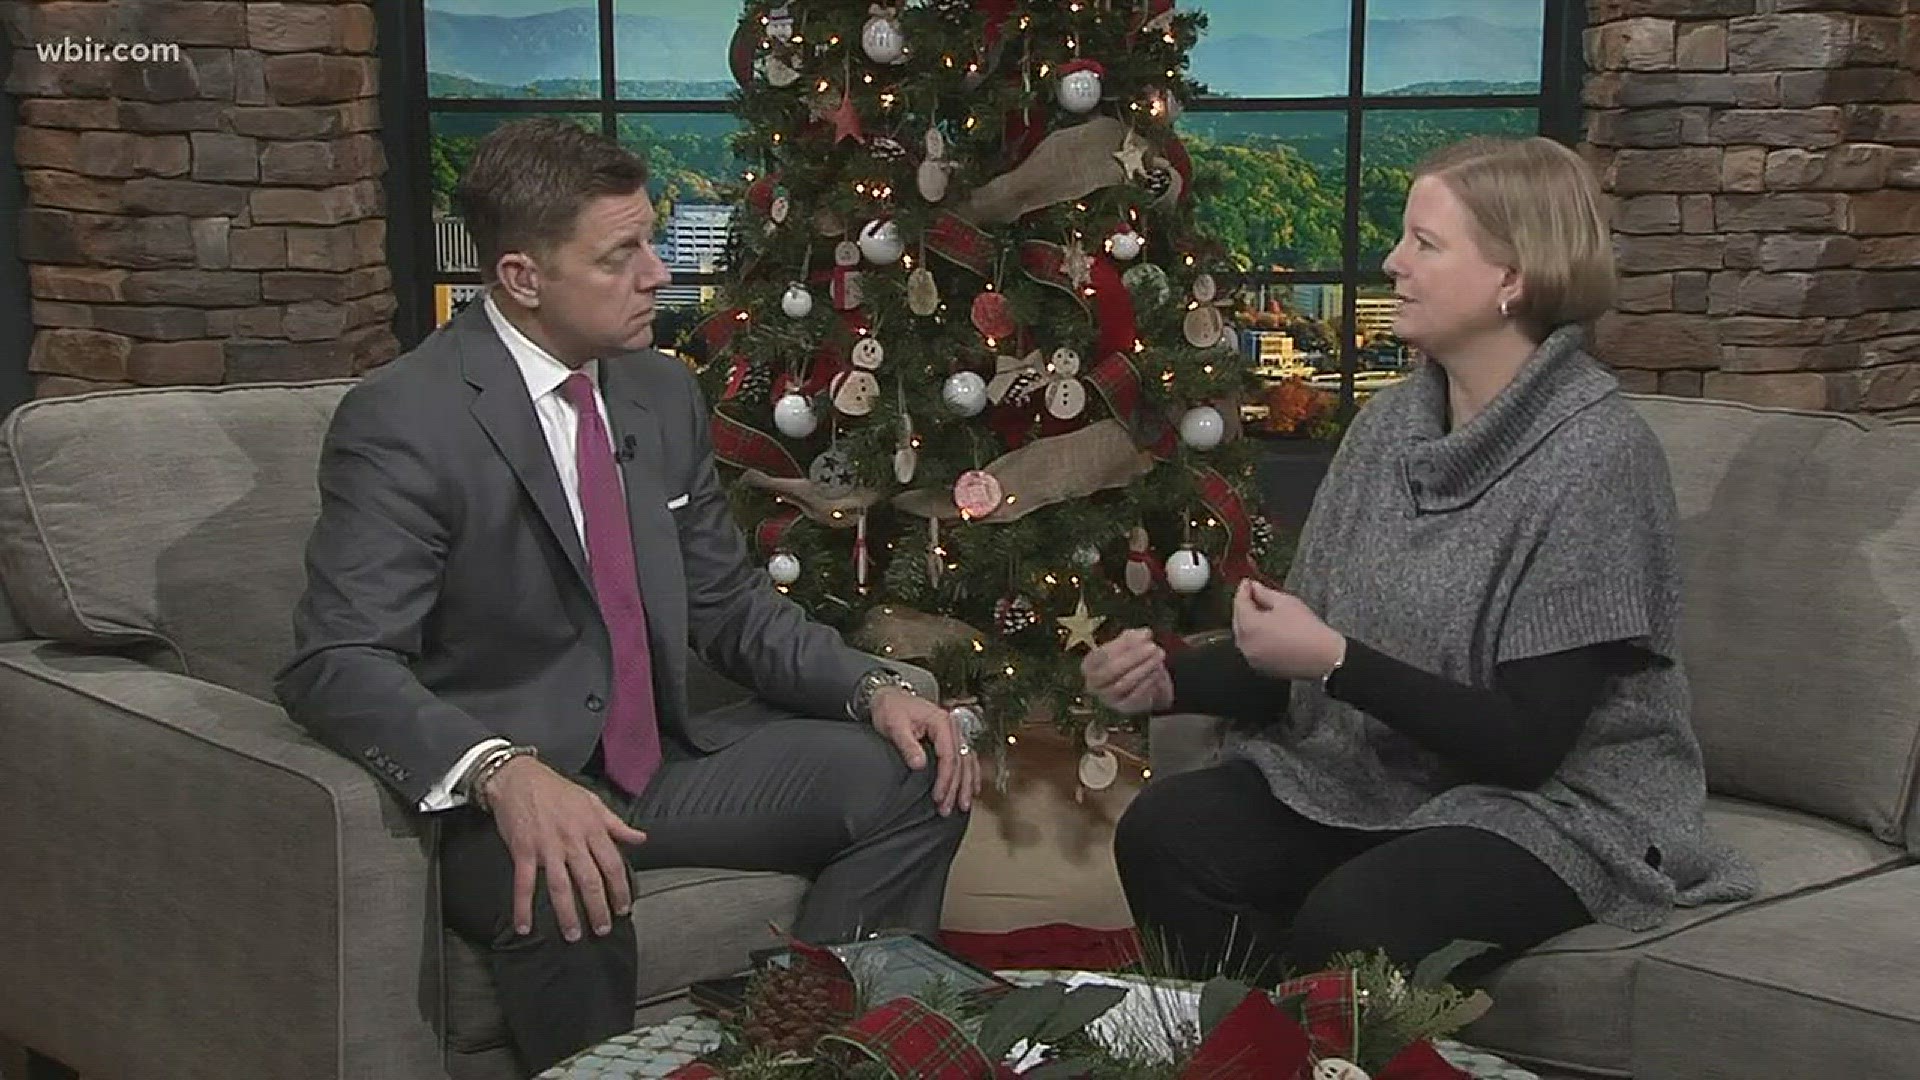 Dec. 11, 2017: Visit Knoxville President Kim Bumpas talks about the economic boost of tourism events in Knoxville.